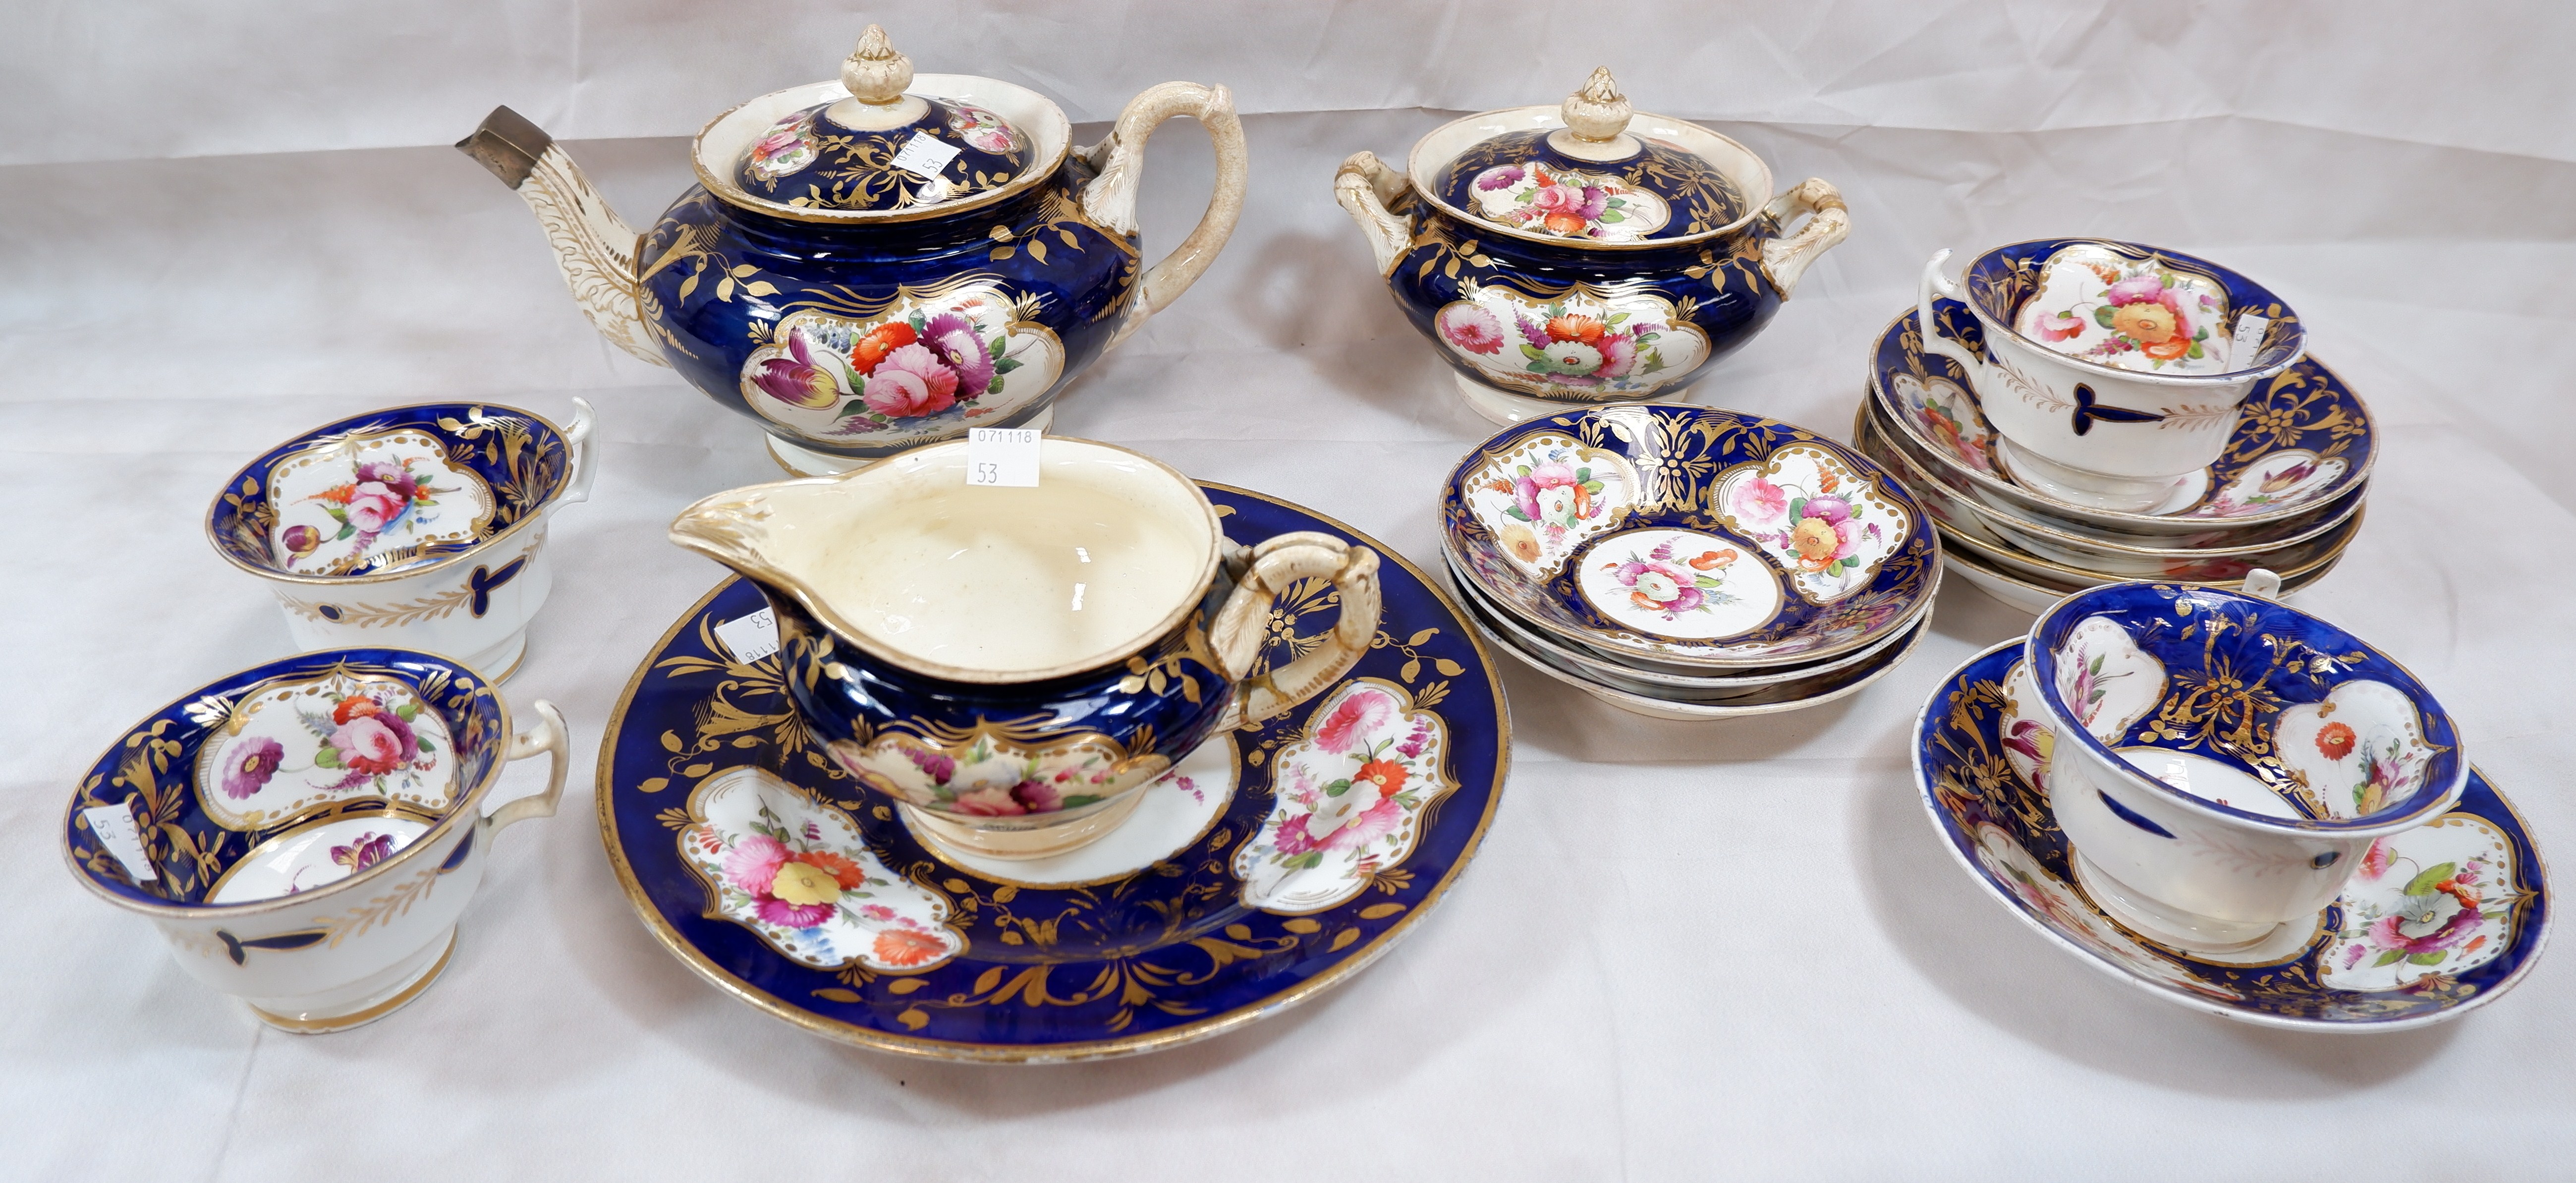 A 19th century English bone china tea service with hand enamelled floral decoration in gilt